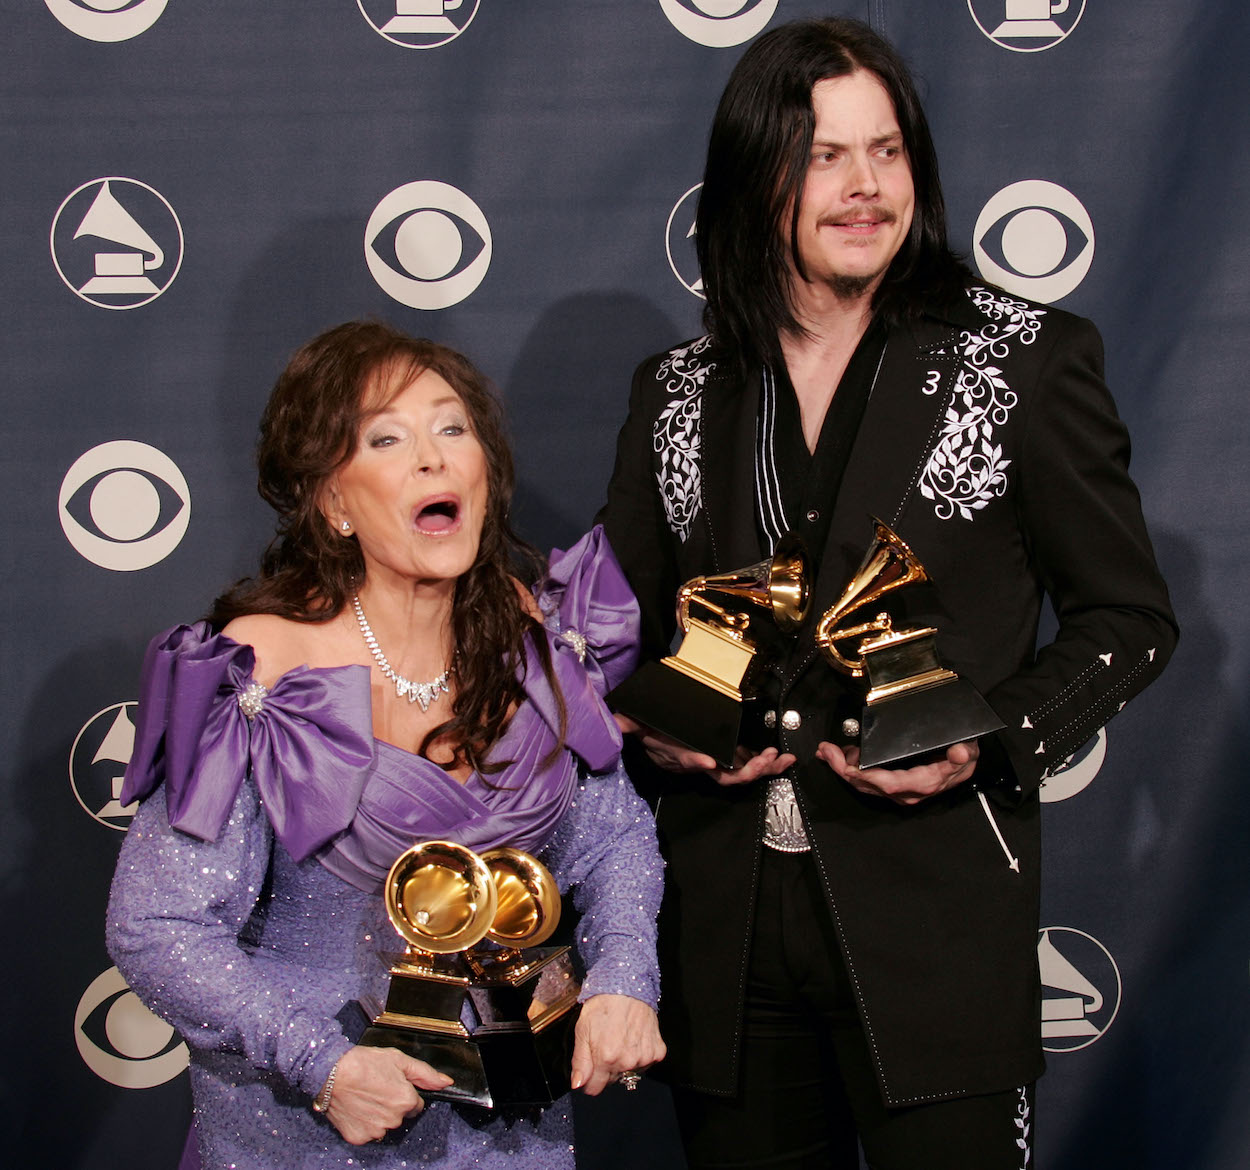 Loretta Lynn (left) hold the two Grammy Awards she won in 2005 while working alongside Jack White (right).